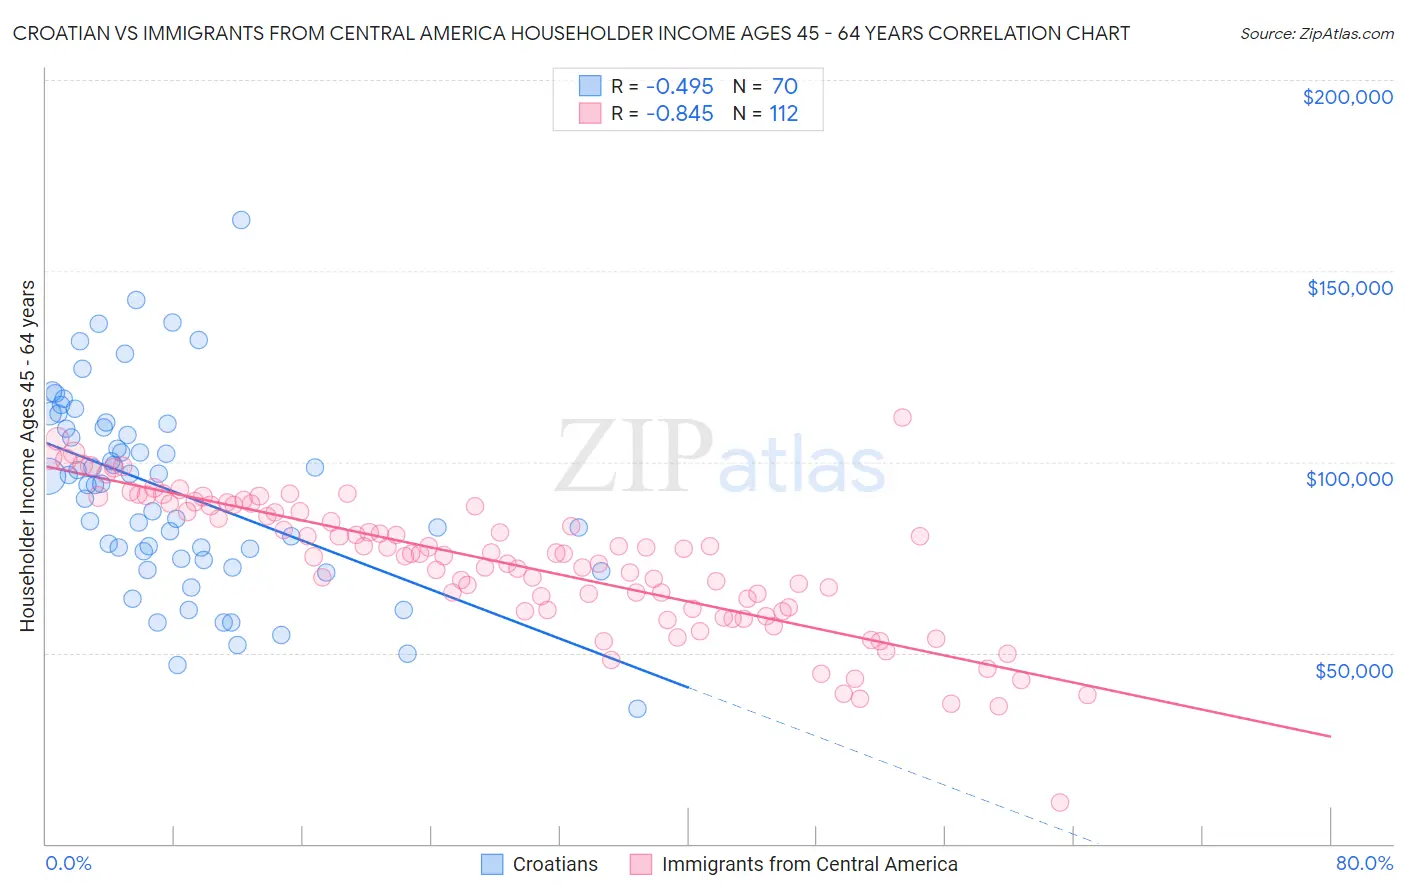 Croatian vs Immigrants from Central America Householder Income Ages 45 - 64 years